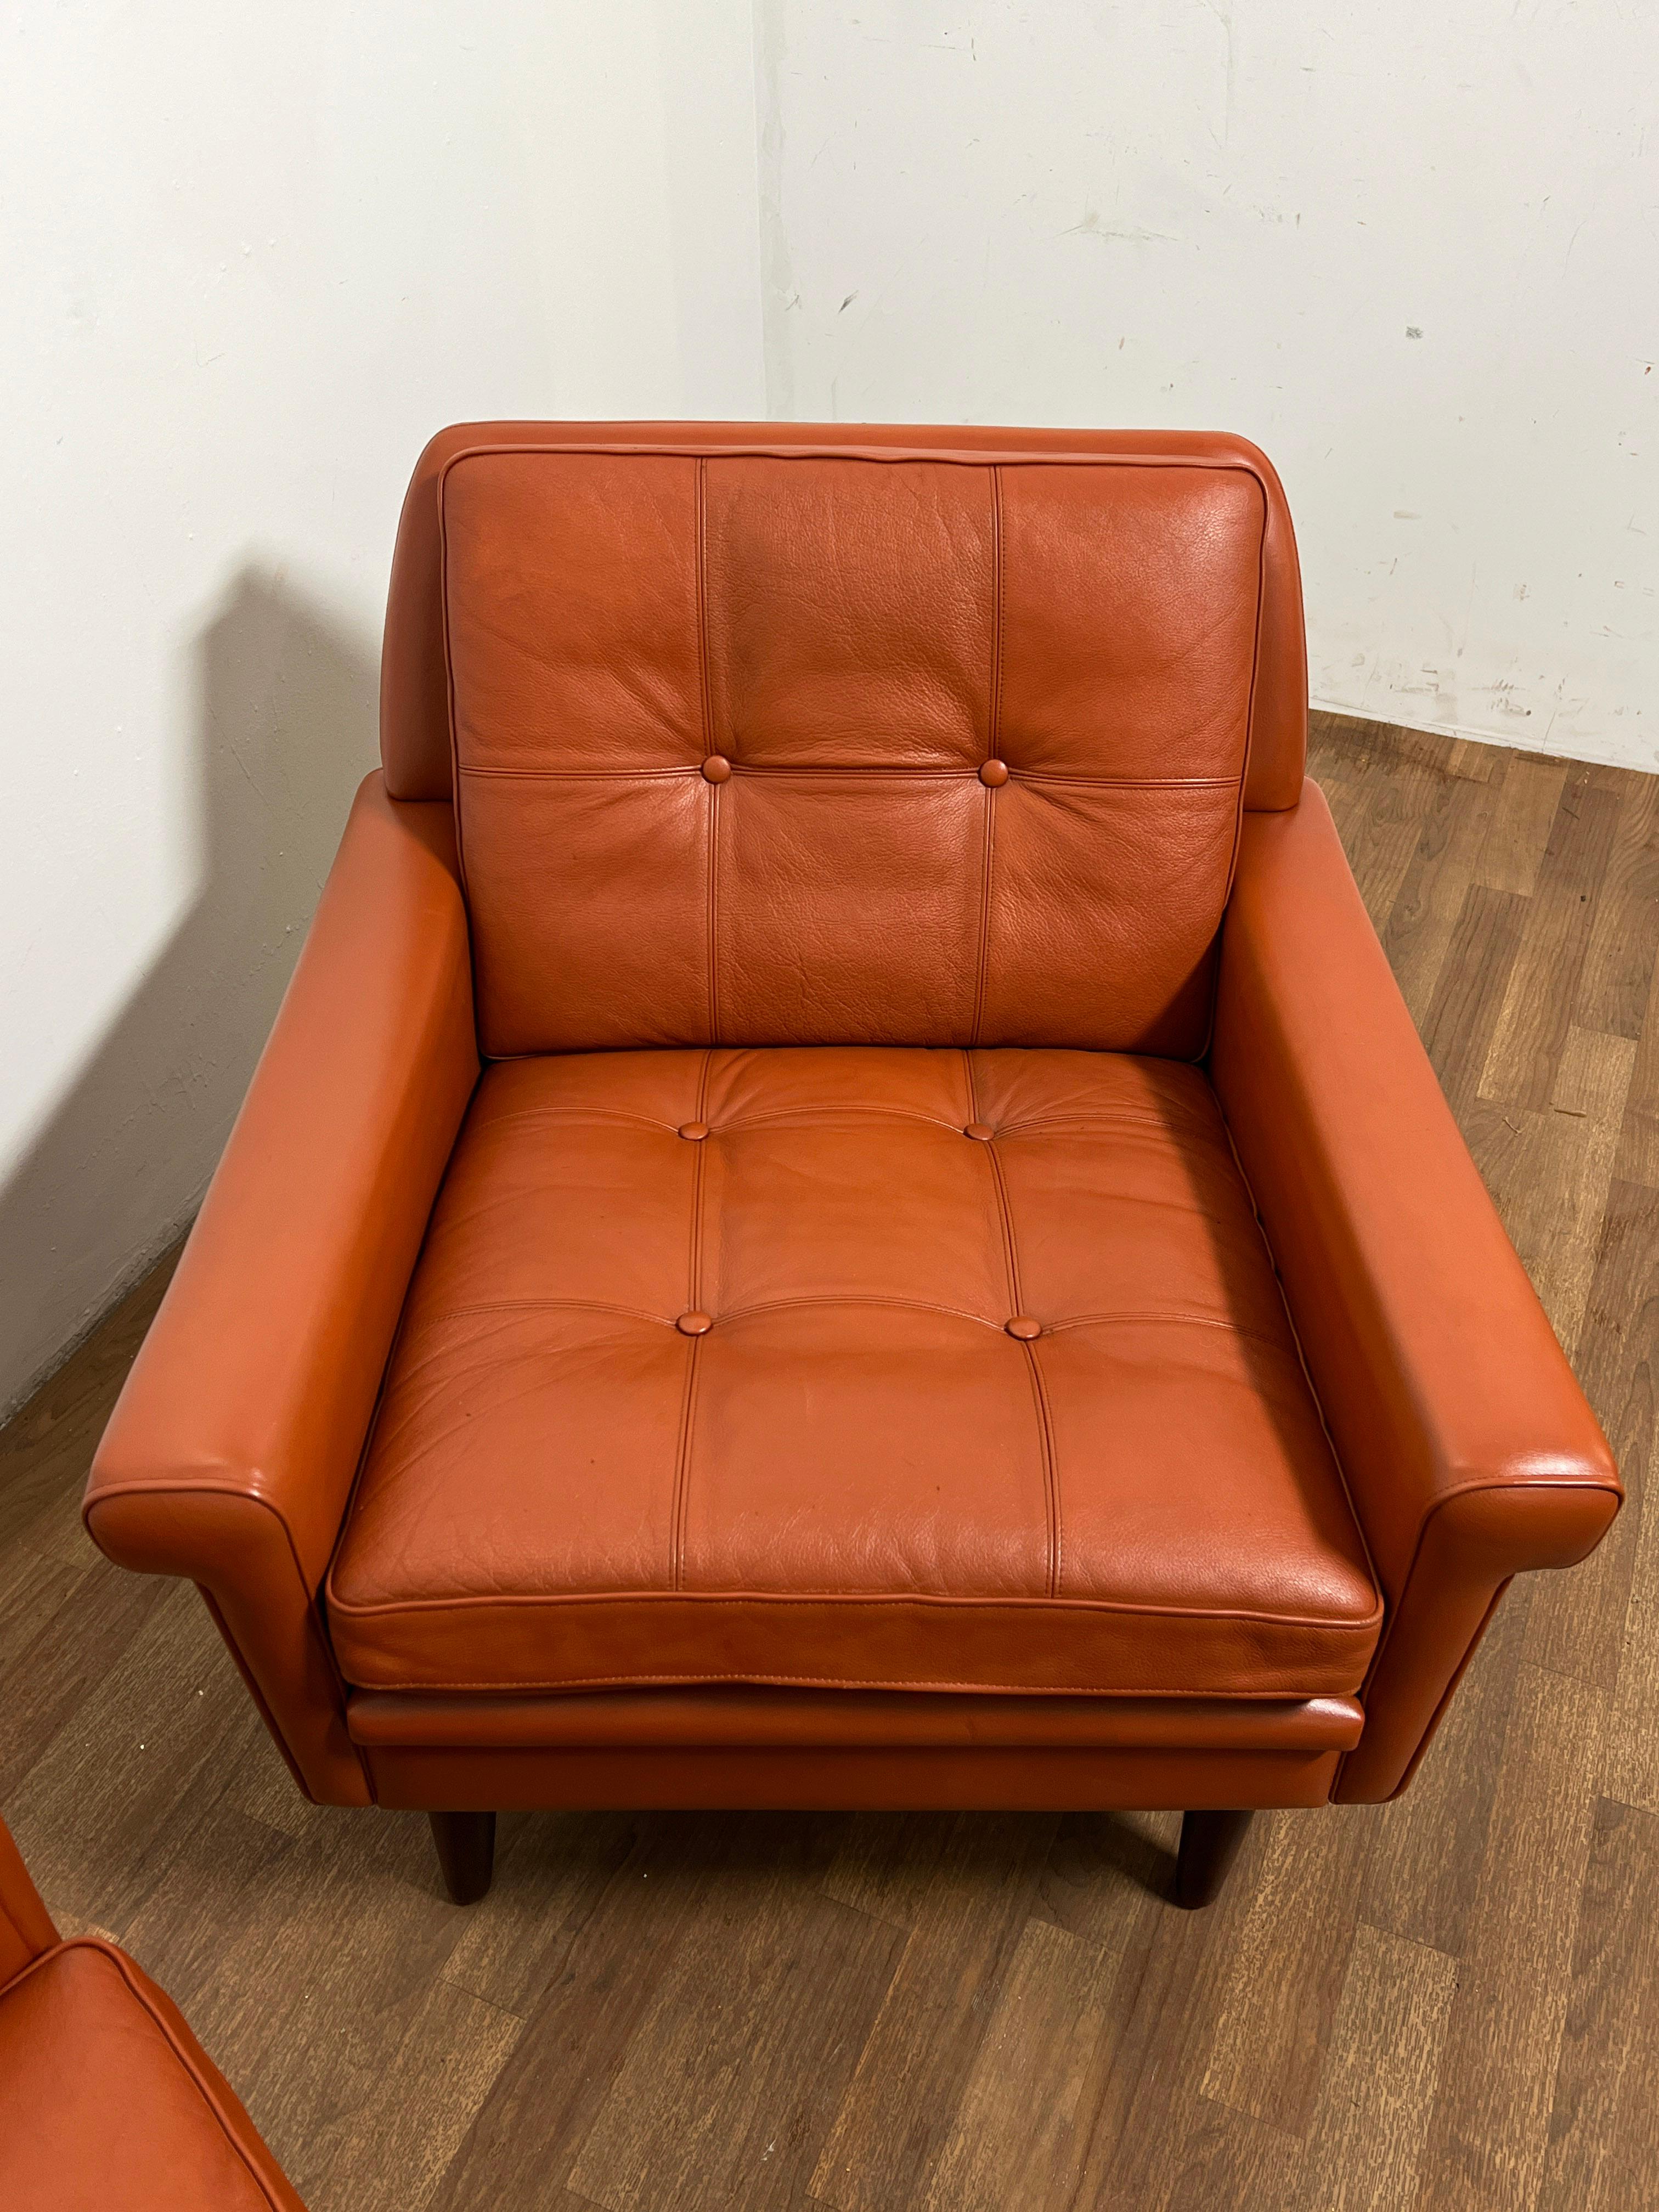 Pair of Danish Leather Lounge Chairs by Svend Skipper, Circa 1960s For Sale 4